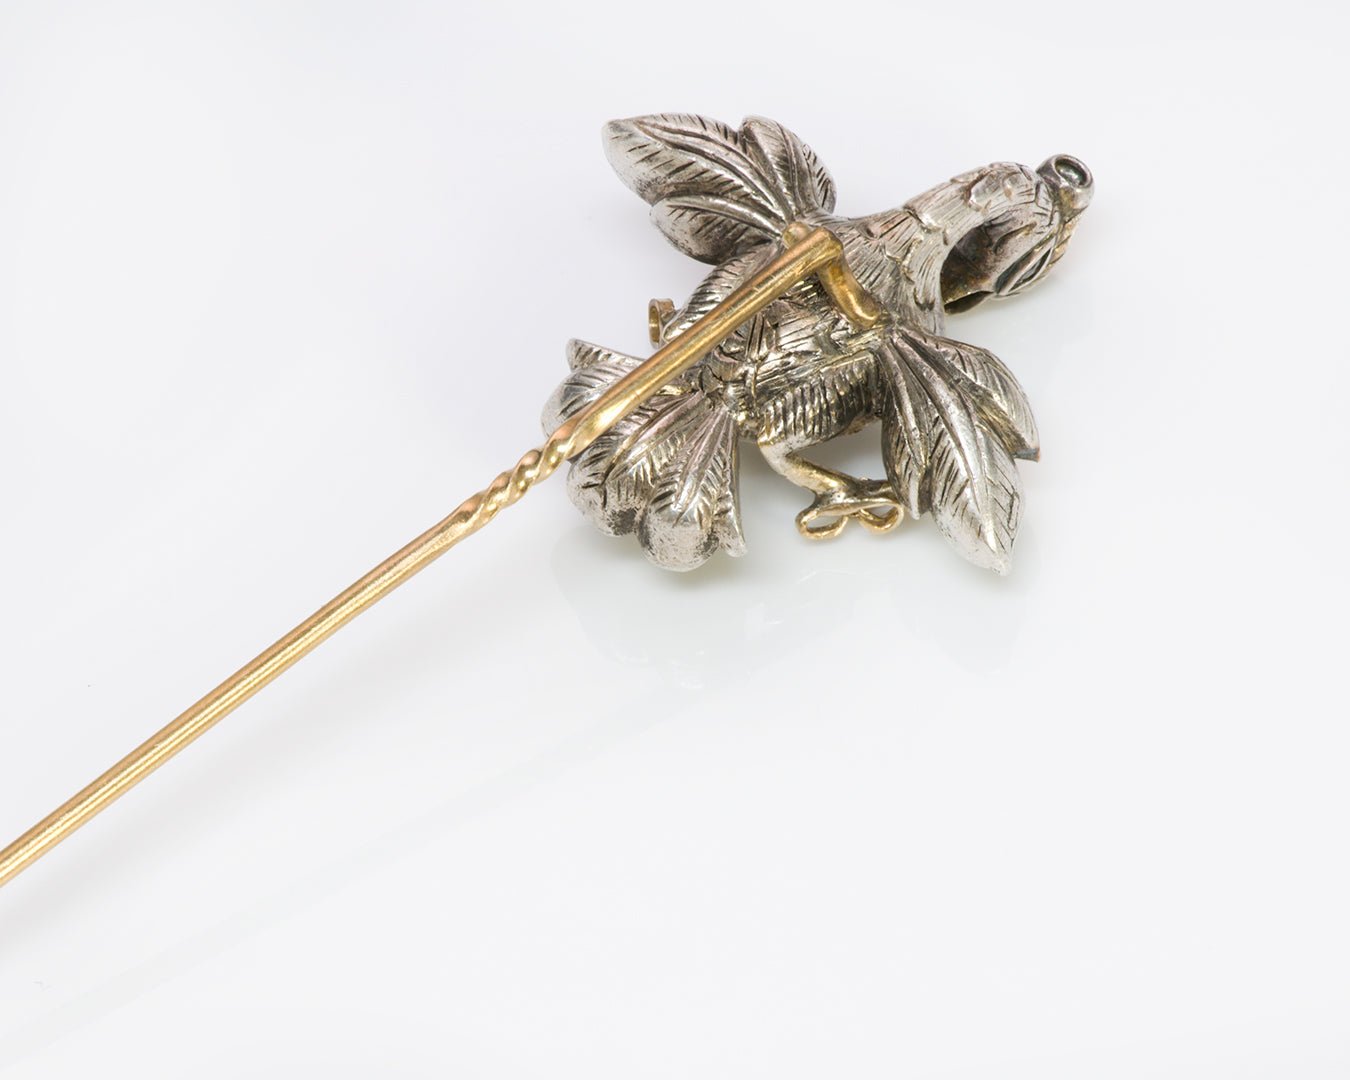 Antique 19th Century Chrysolite Silver Toped Gold Falcon Stick Pin - DSF Antique Jewelry